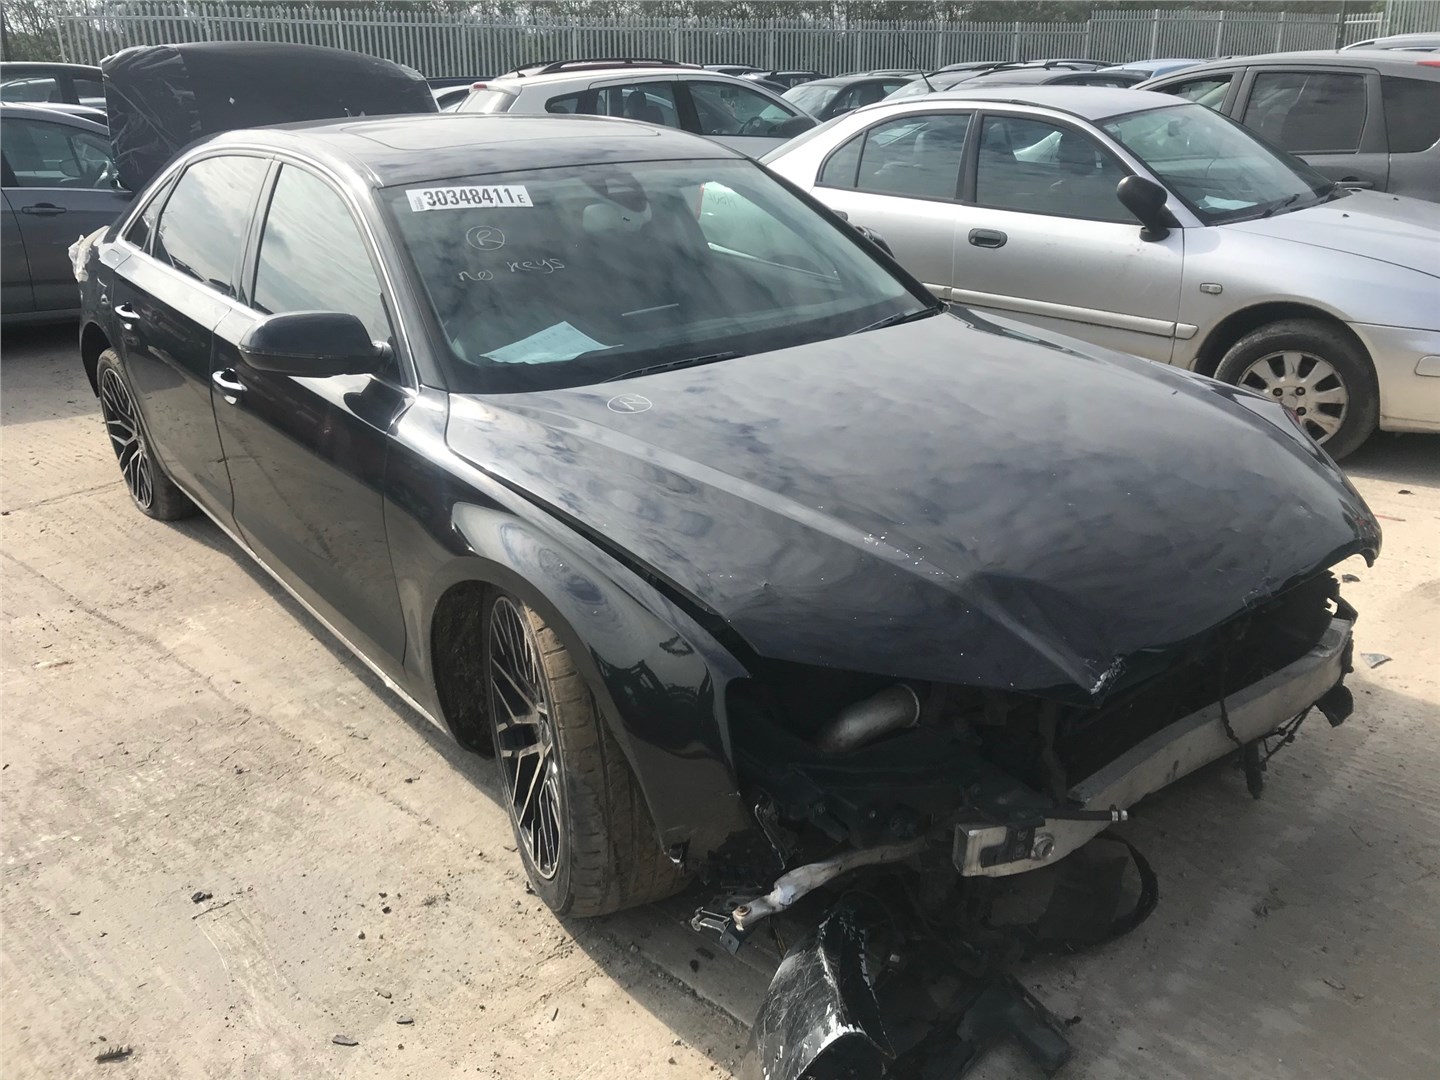 8R0857511B Зеркало салона Audi A8 (D4) 2010-2017 2012